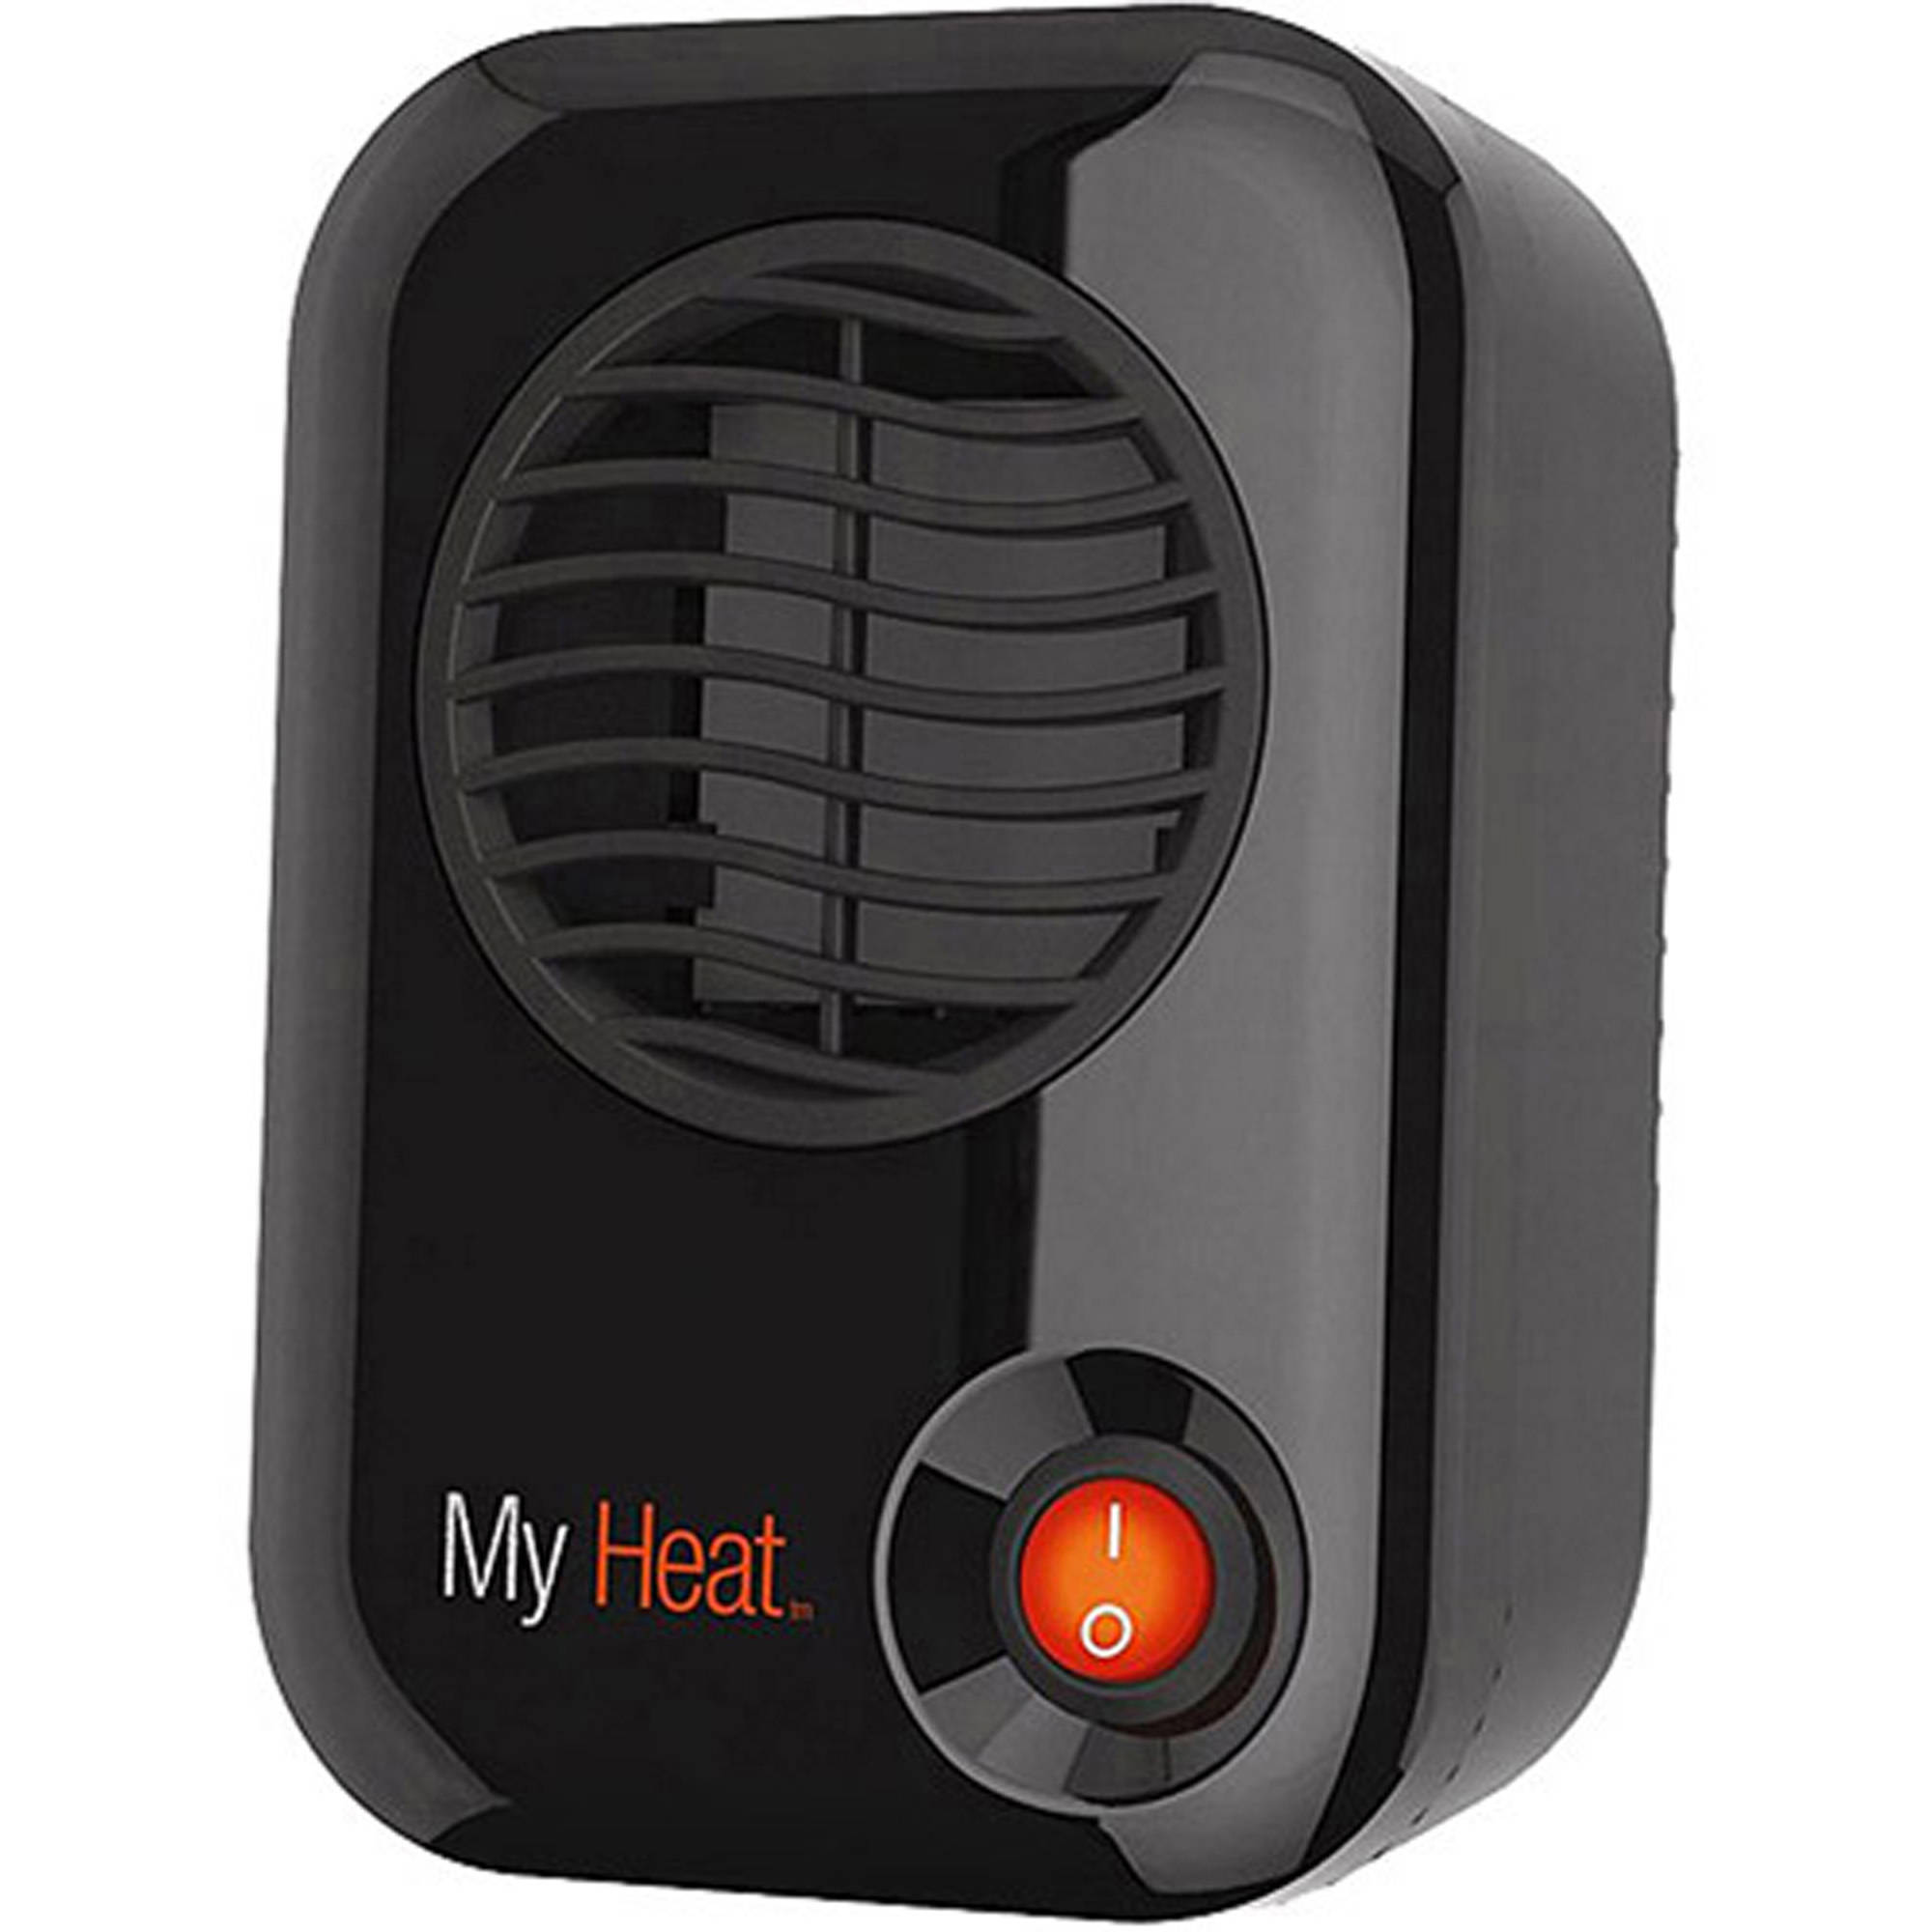 Safe Over-Heat Protection Heater Fan multifun Space Heater 2000W Ceramic Space Heater with Adjustable Thermostat 2sec Heating Up Portable Personal Small Electric Heater 